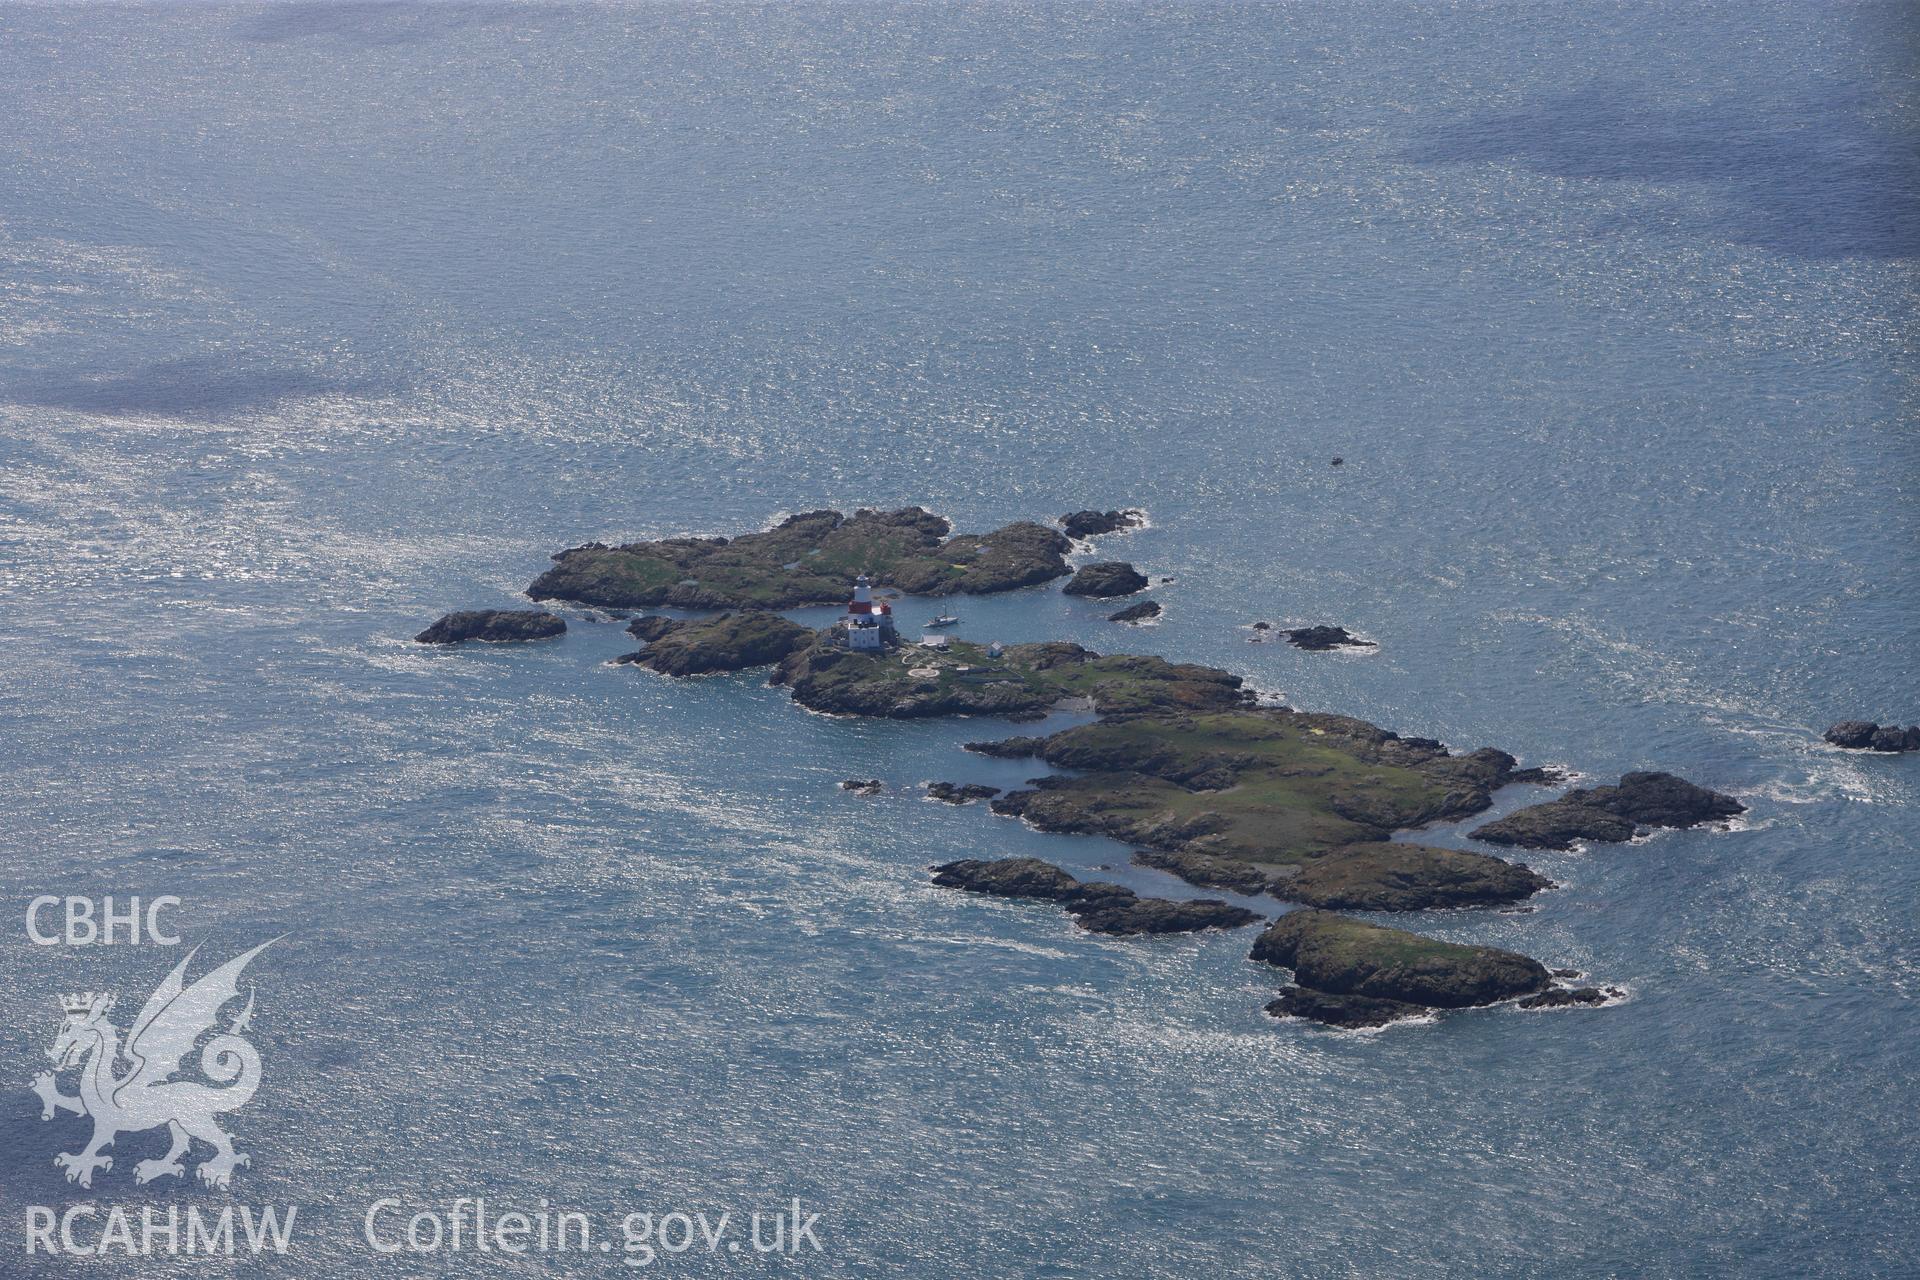 RCAHMW colour oblique photograph of Skerries Lighthouse, The Skerries, landscape from east. Taken by Toby Driver on 20/07/2011.